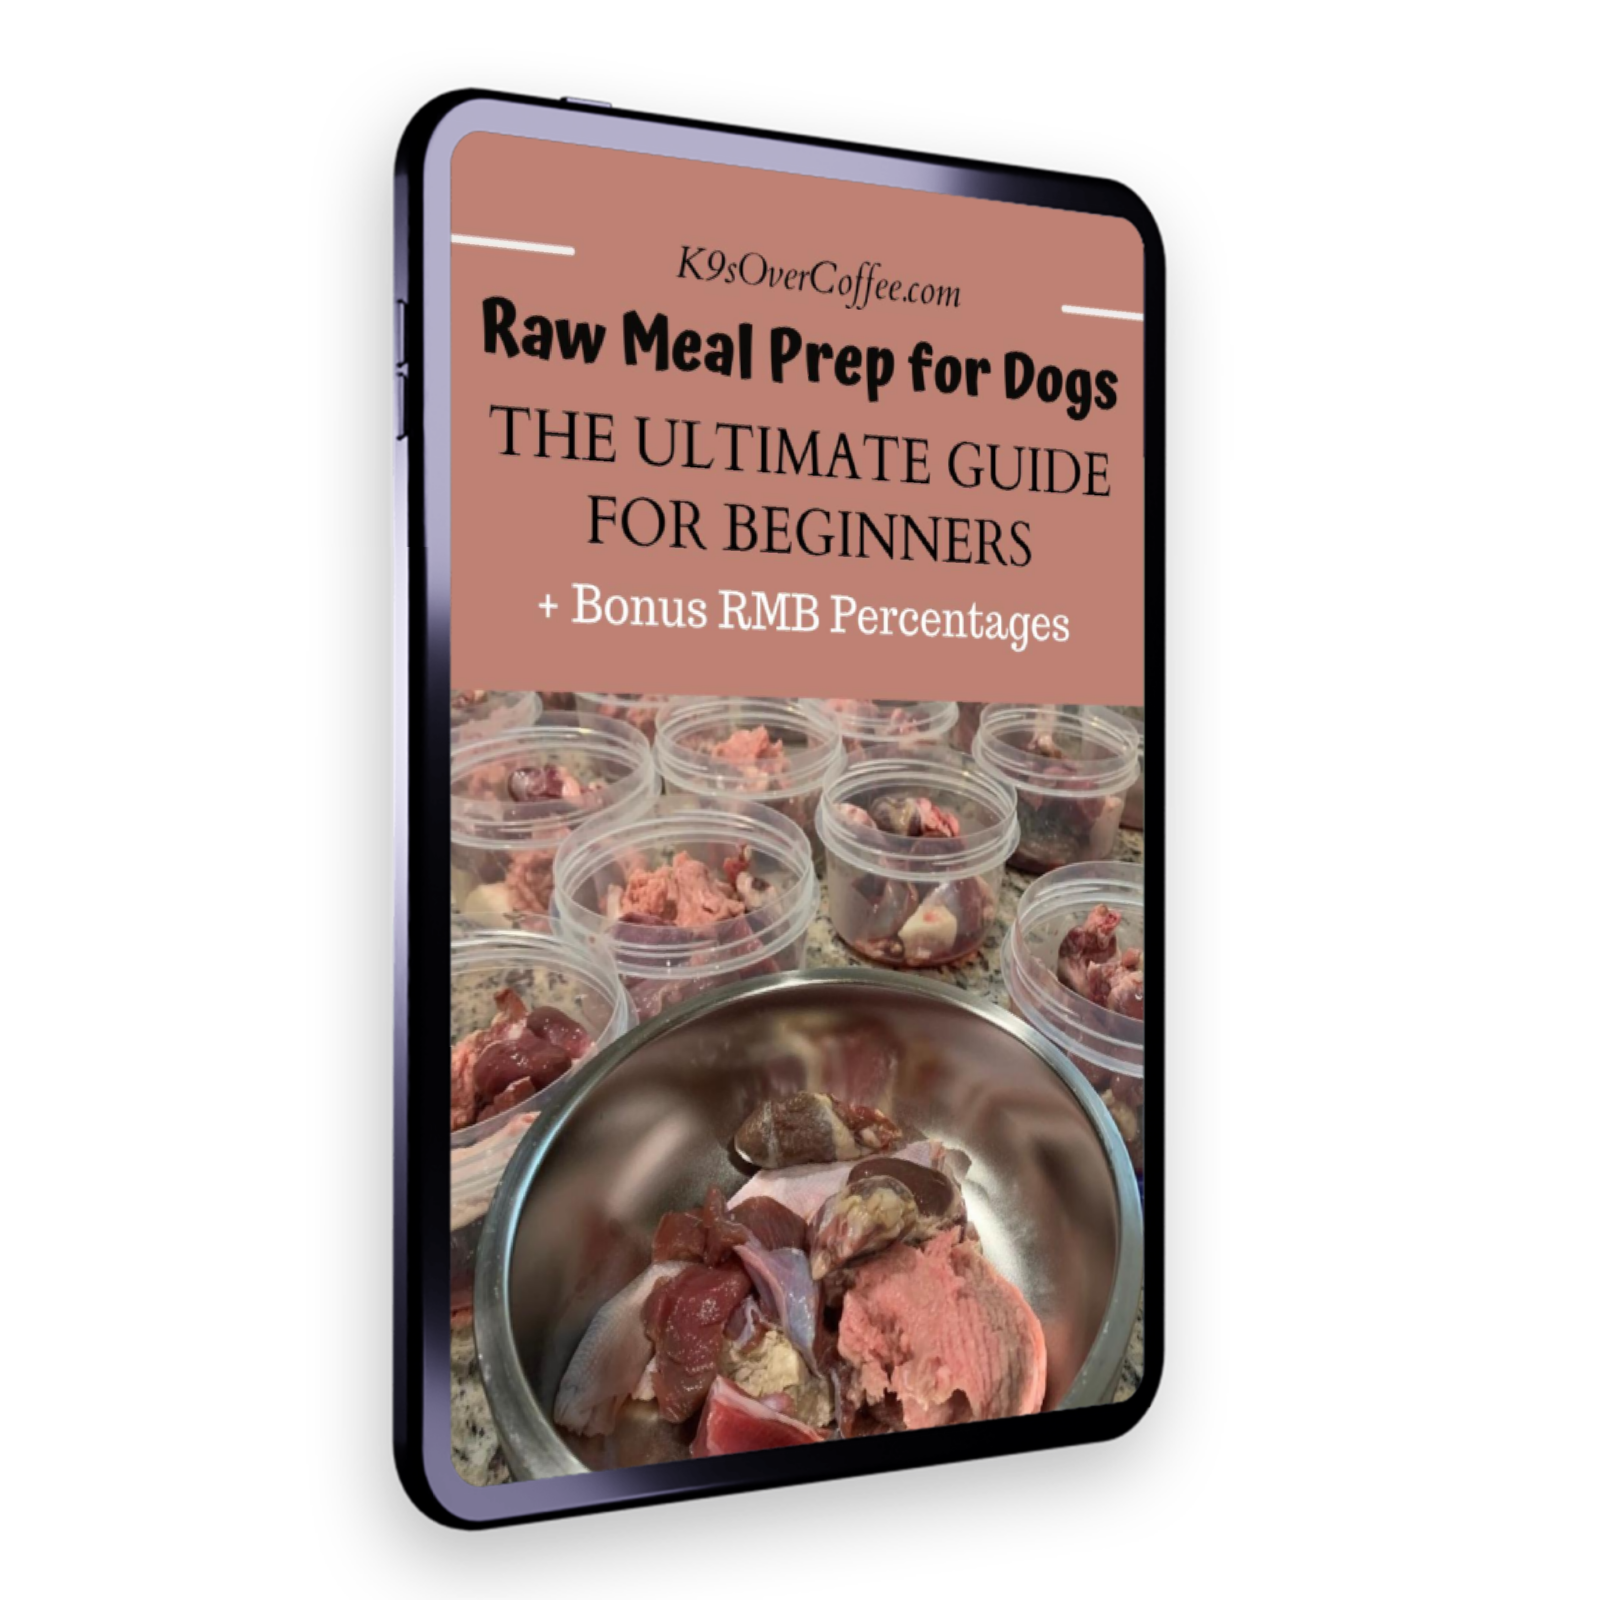 The ebook The ultimate guide to raw meal prep for dogs  is part of the discounted raw dog food ebook bundle